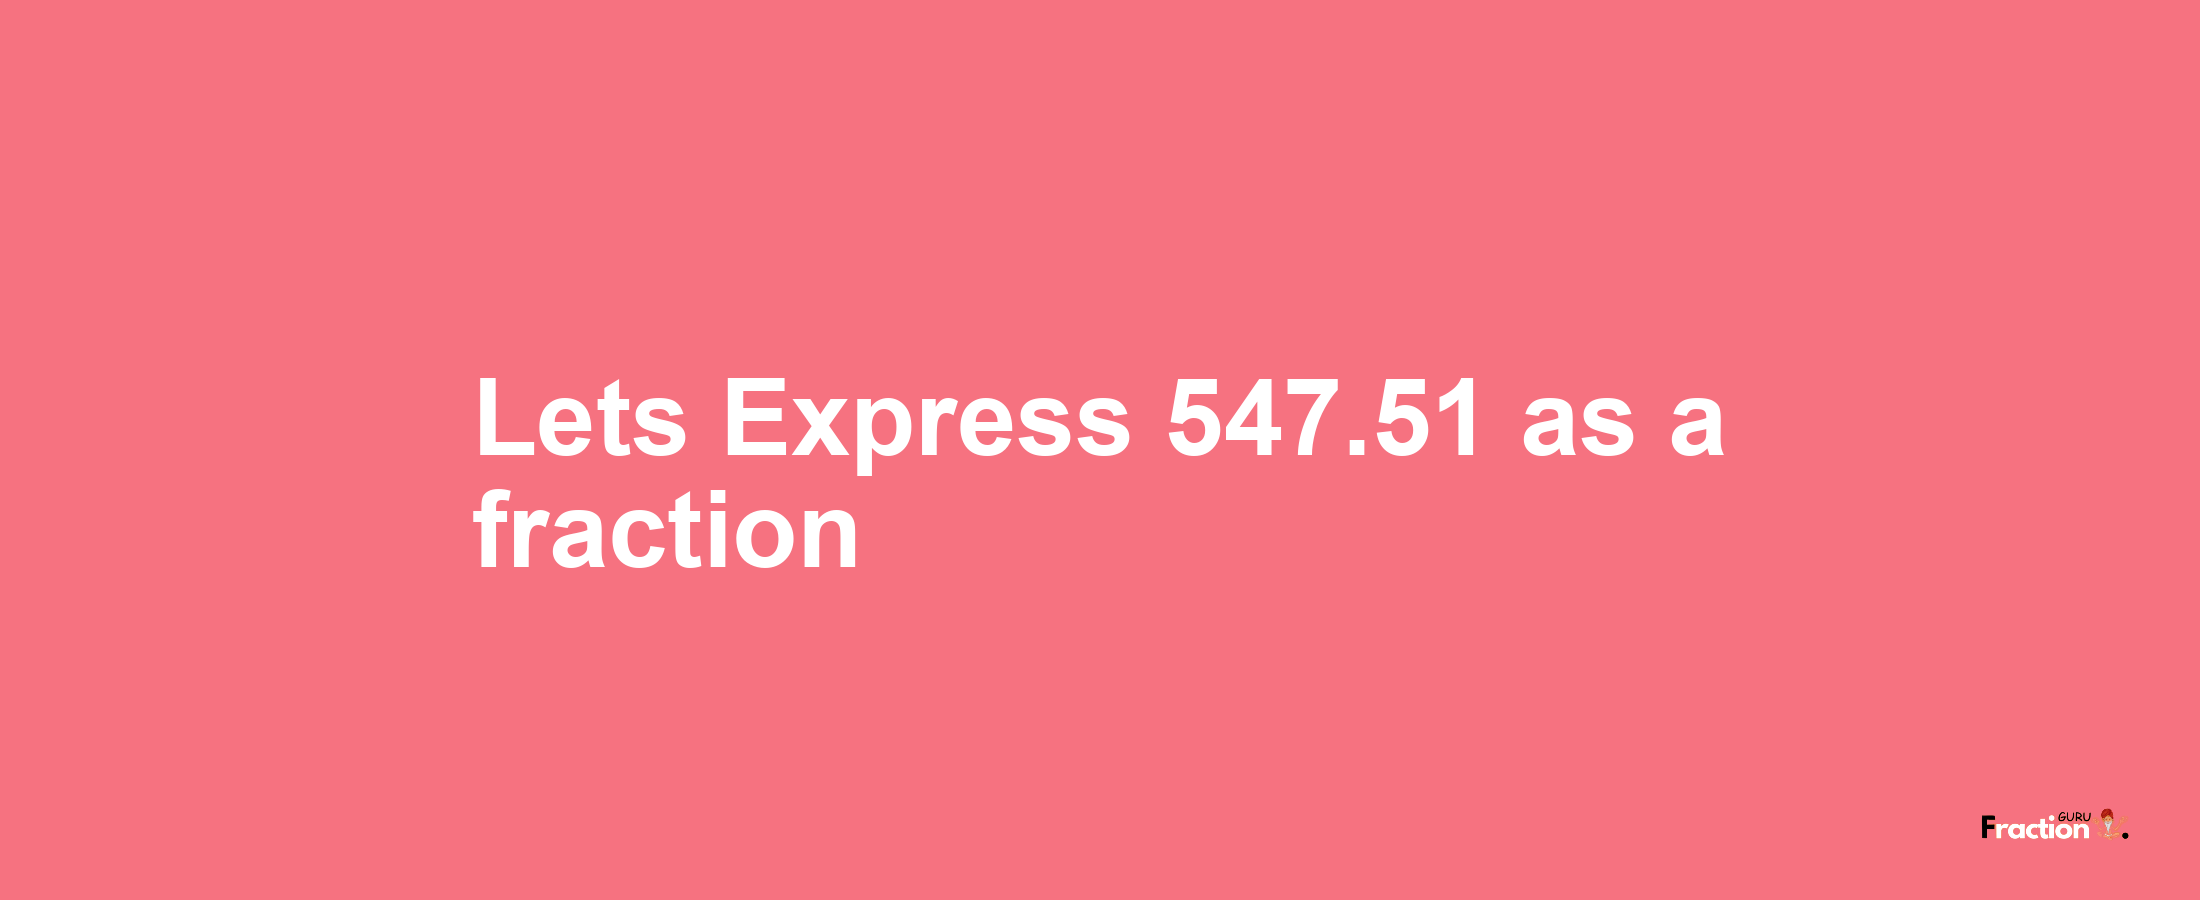 Lets Express 547.51 as afraction